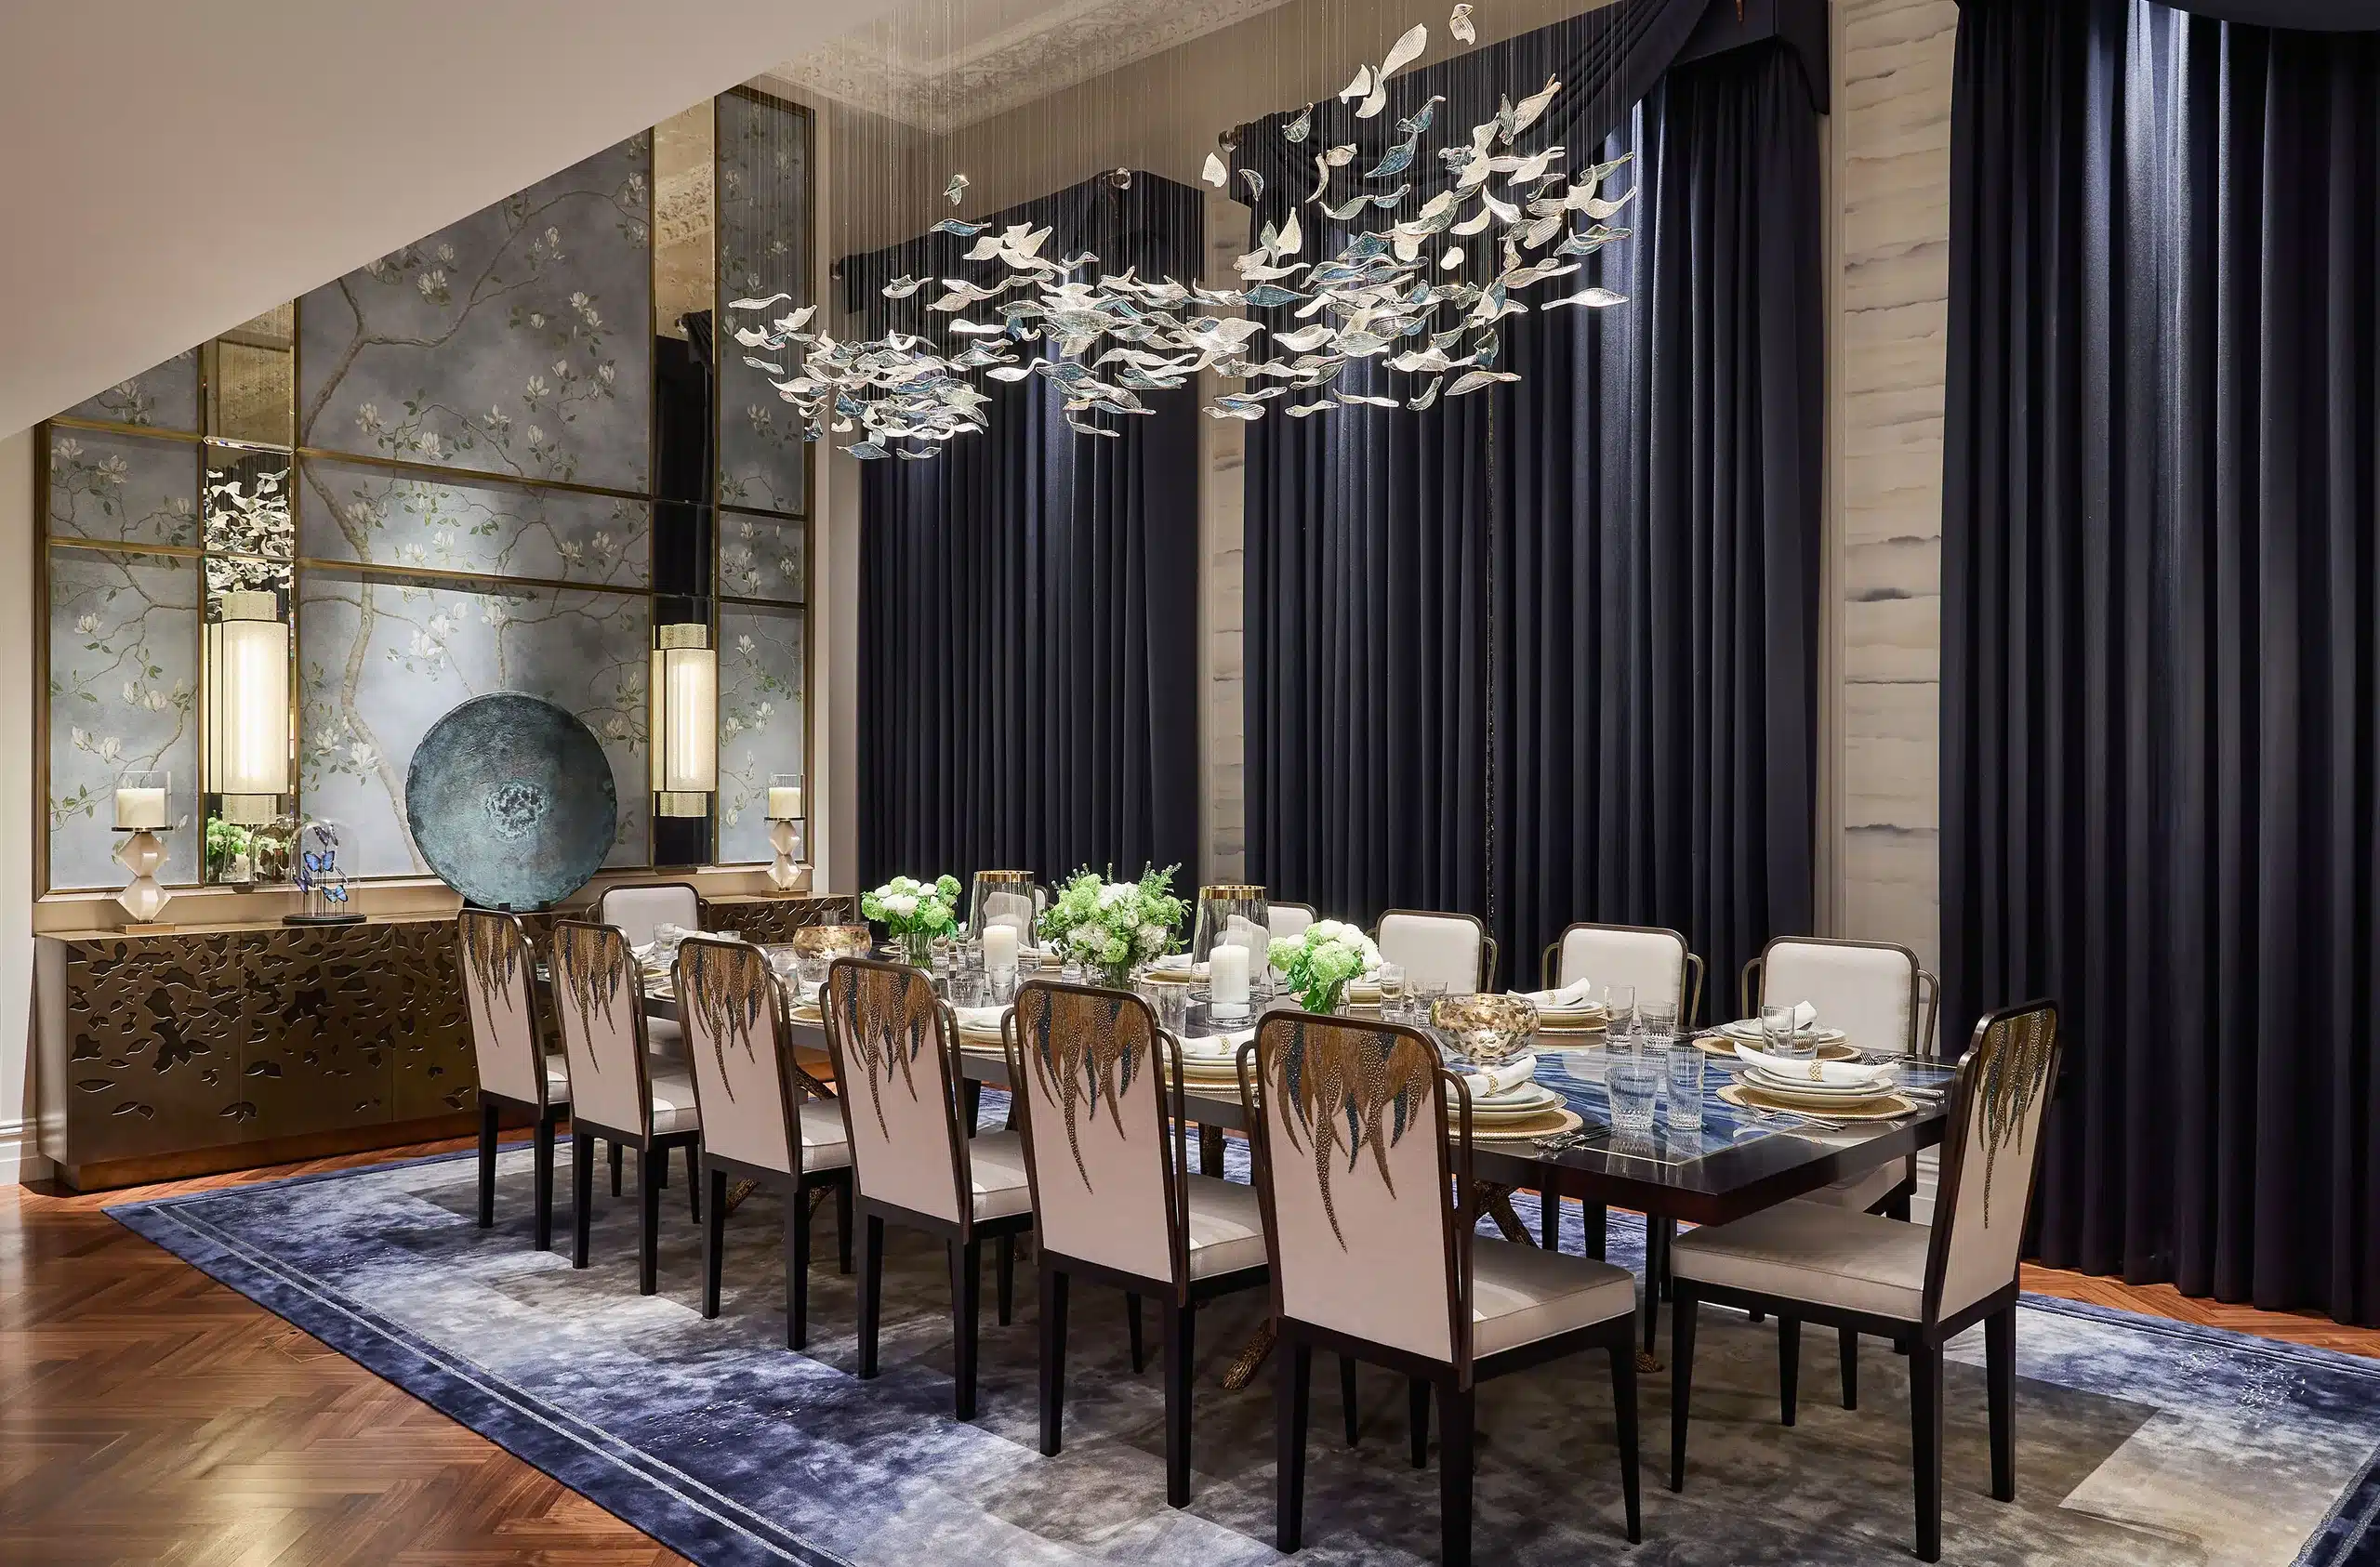 A dining room in a property development at the lancasters estate near hyde park in london. Interior design by katharine pooley, the uk's best interior design studio